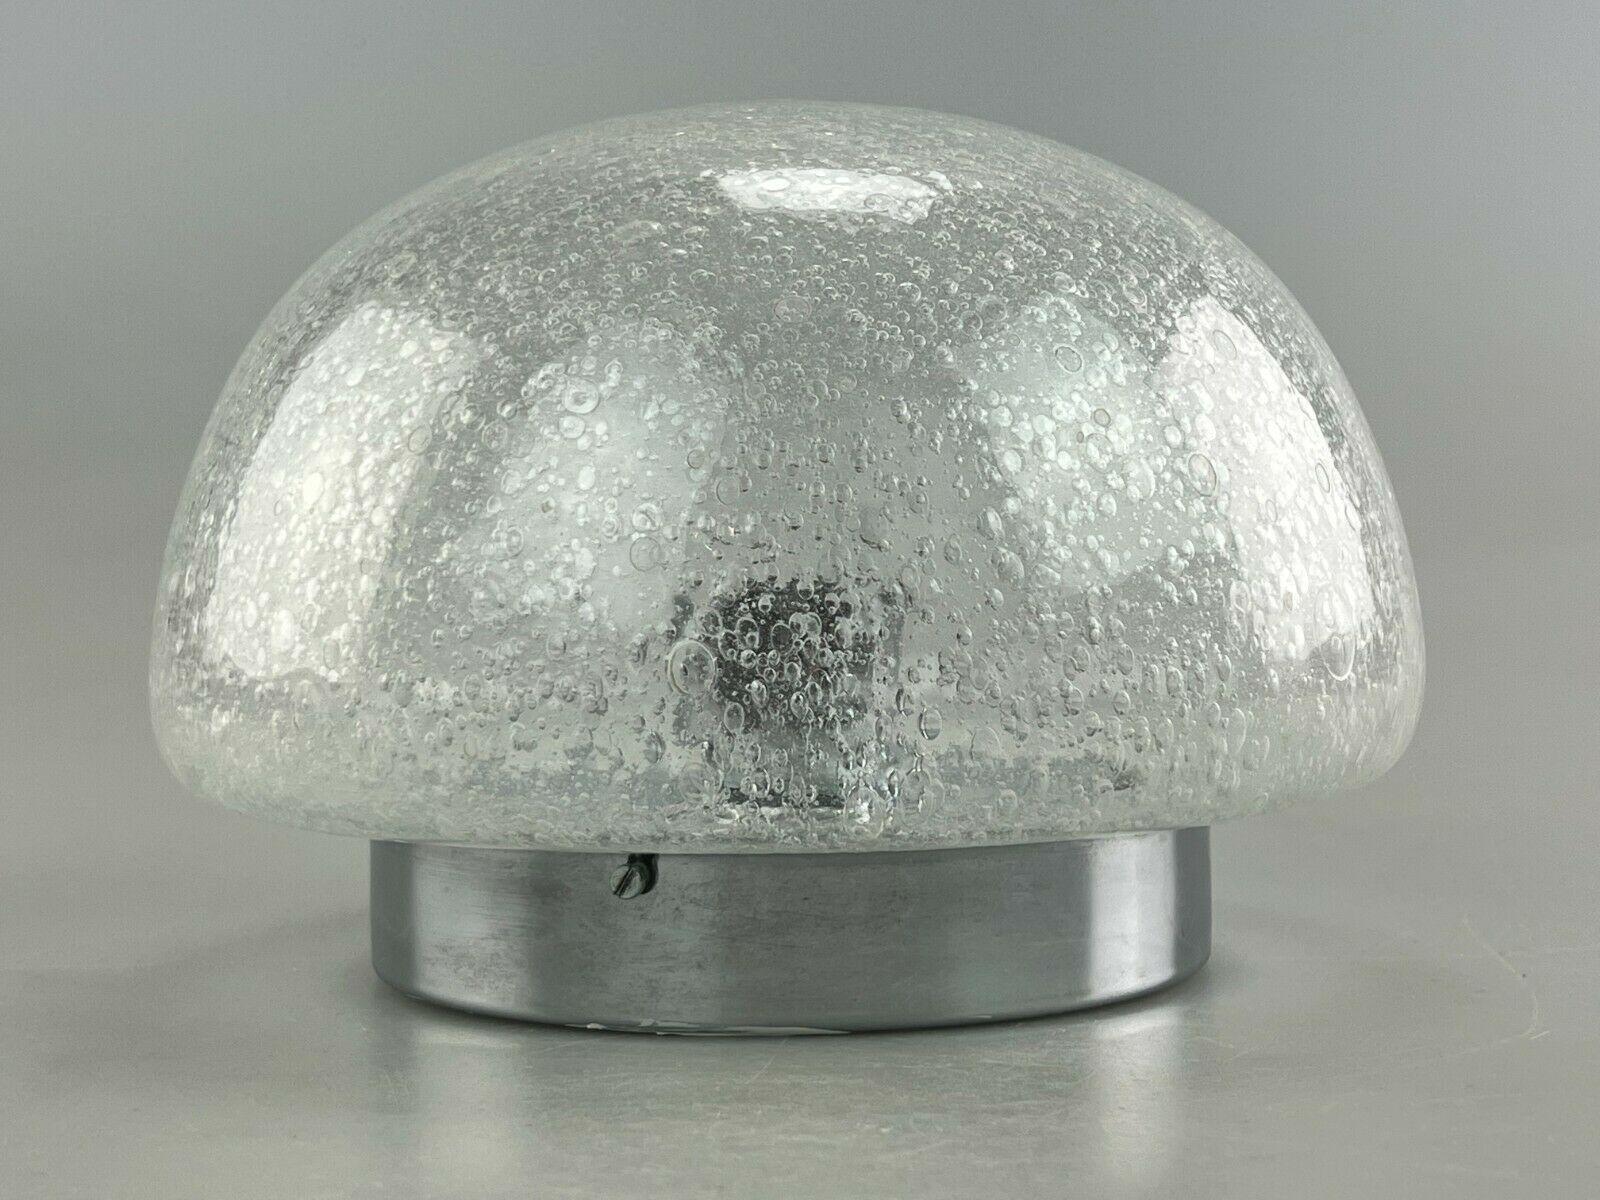 60s 70s lamp light wall lamp wall lamp Hillebrand Space Age Design

Object: wall lamp

Manufacturer: Hillebrand

Condition: good

Age: around 1960-1970

Dimensions:

Diameter = 22.5cm
Height = 15.5cm

Other notes:

The pictures